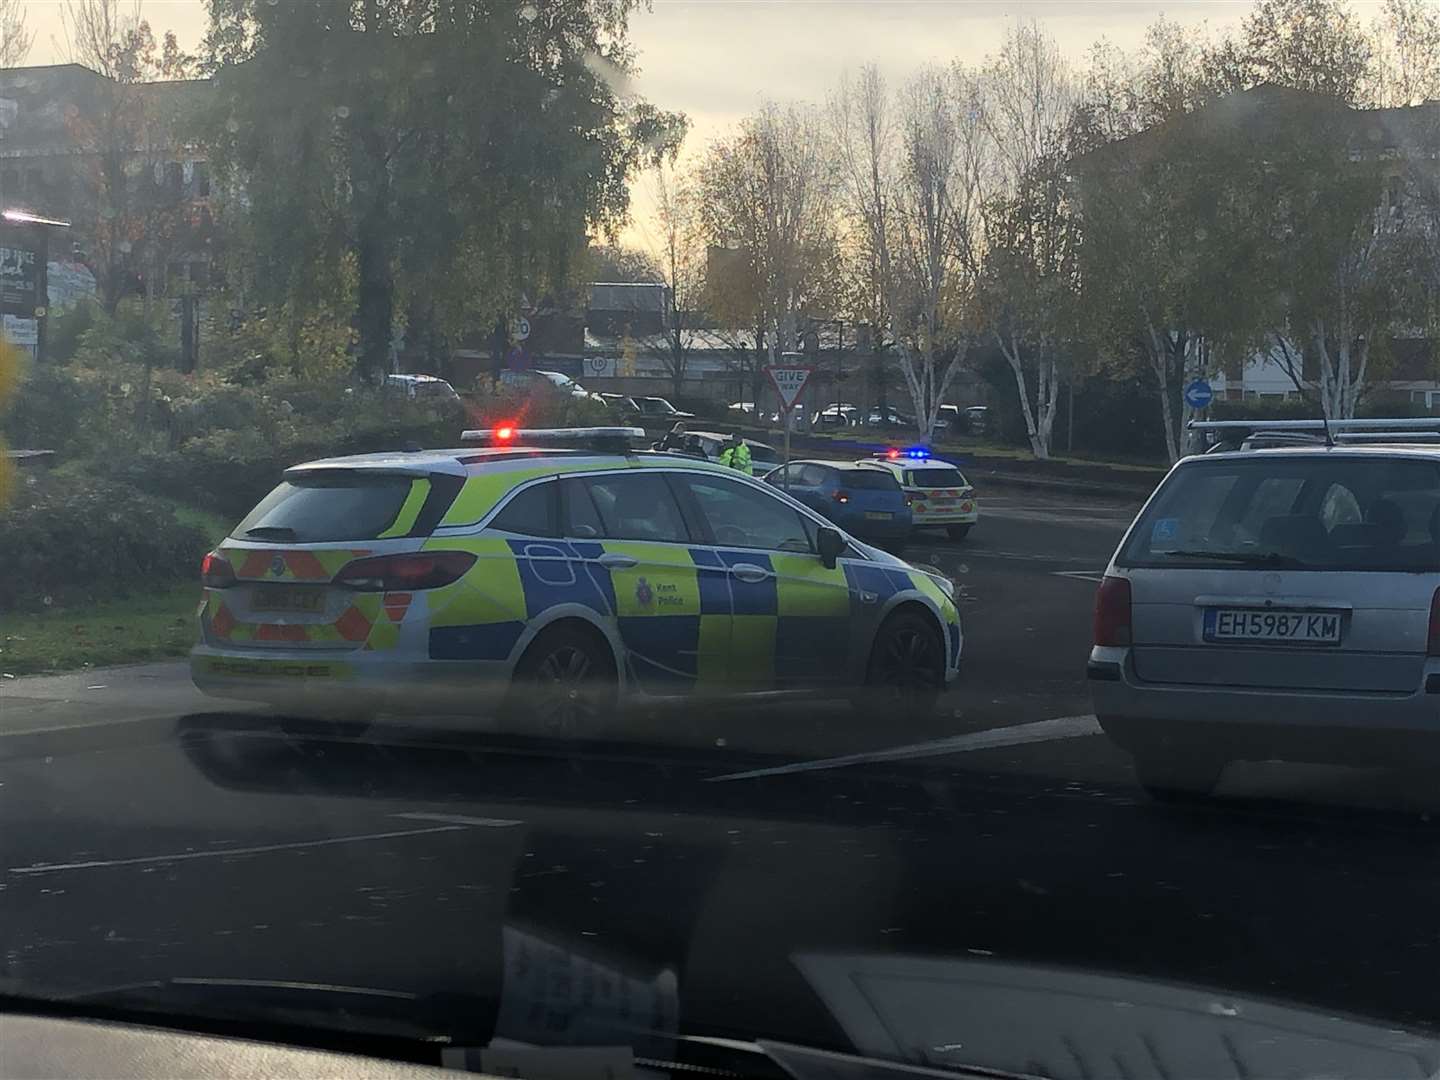 Police are at the scene of a collision near Royal Engineers Road (21530242)